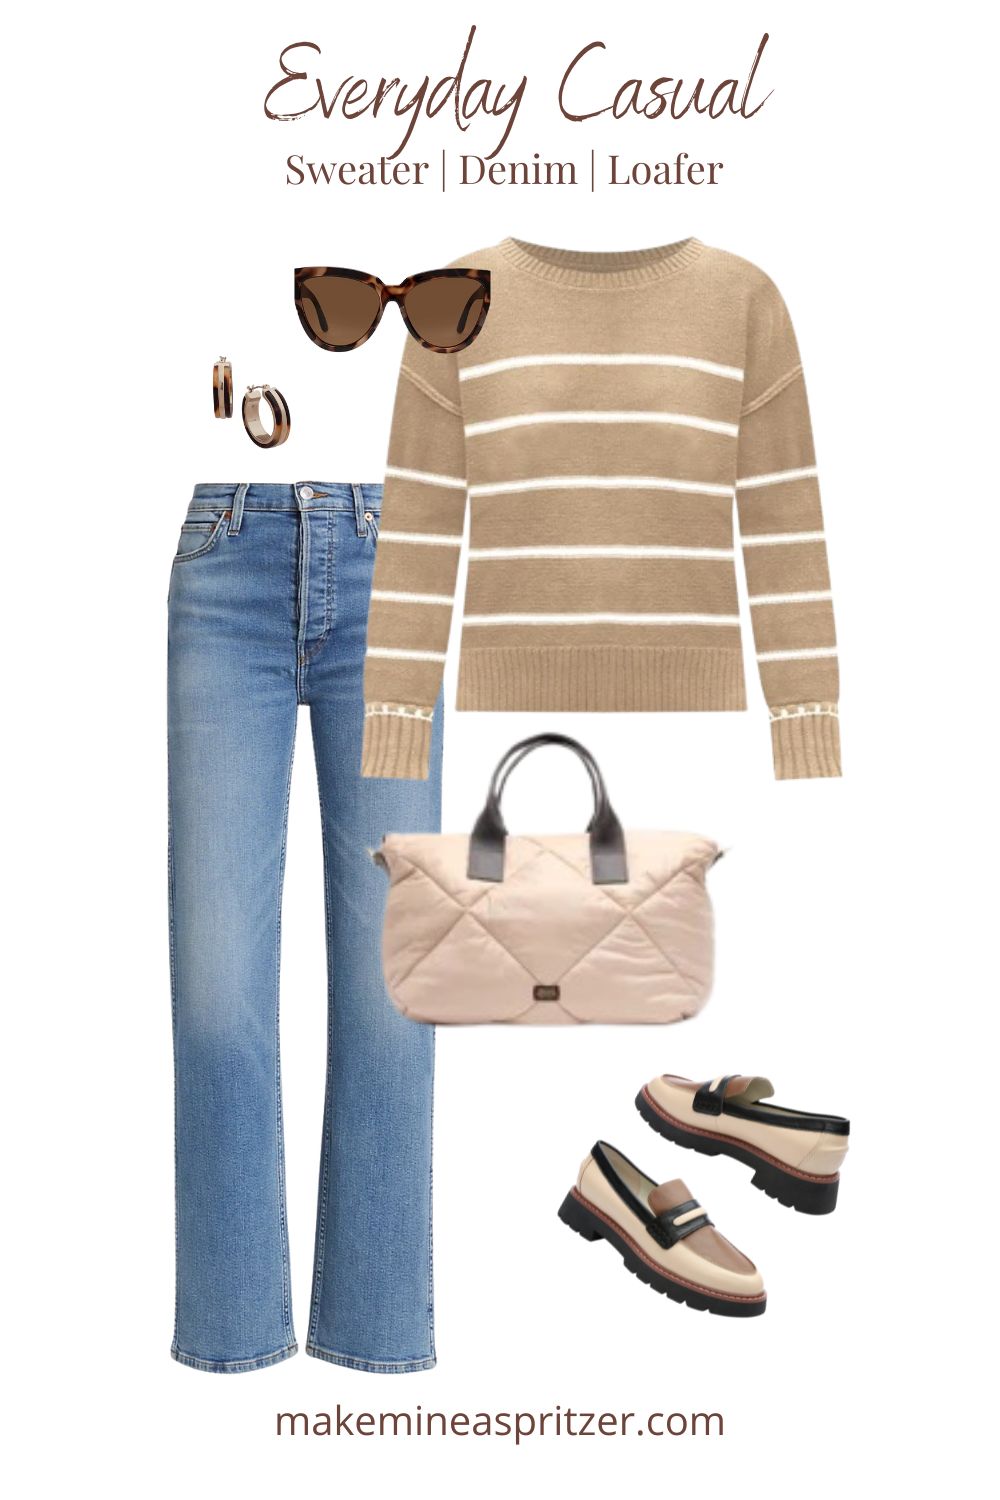 Denim Sweater Loafer Outfit Collage.